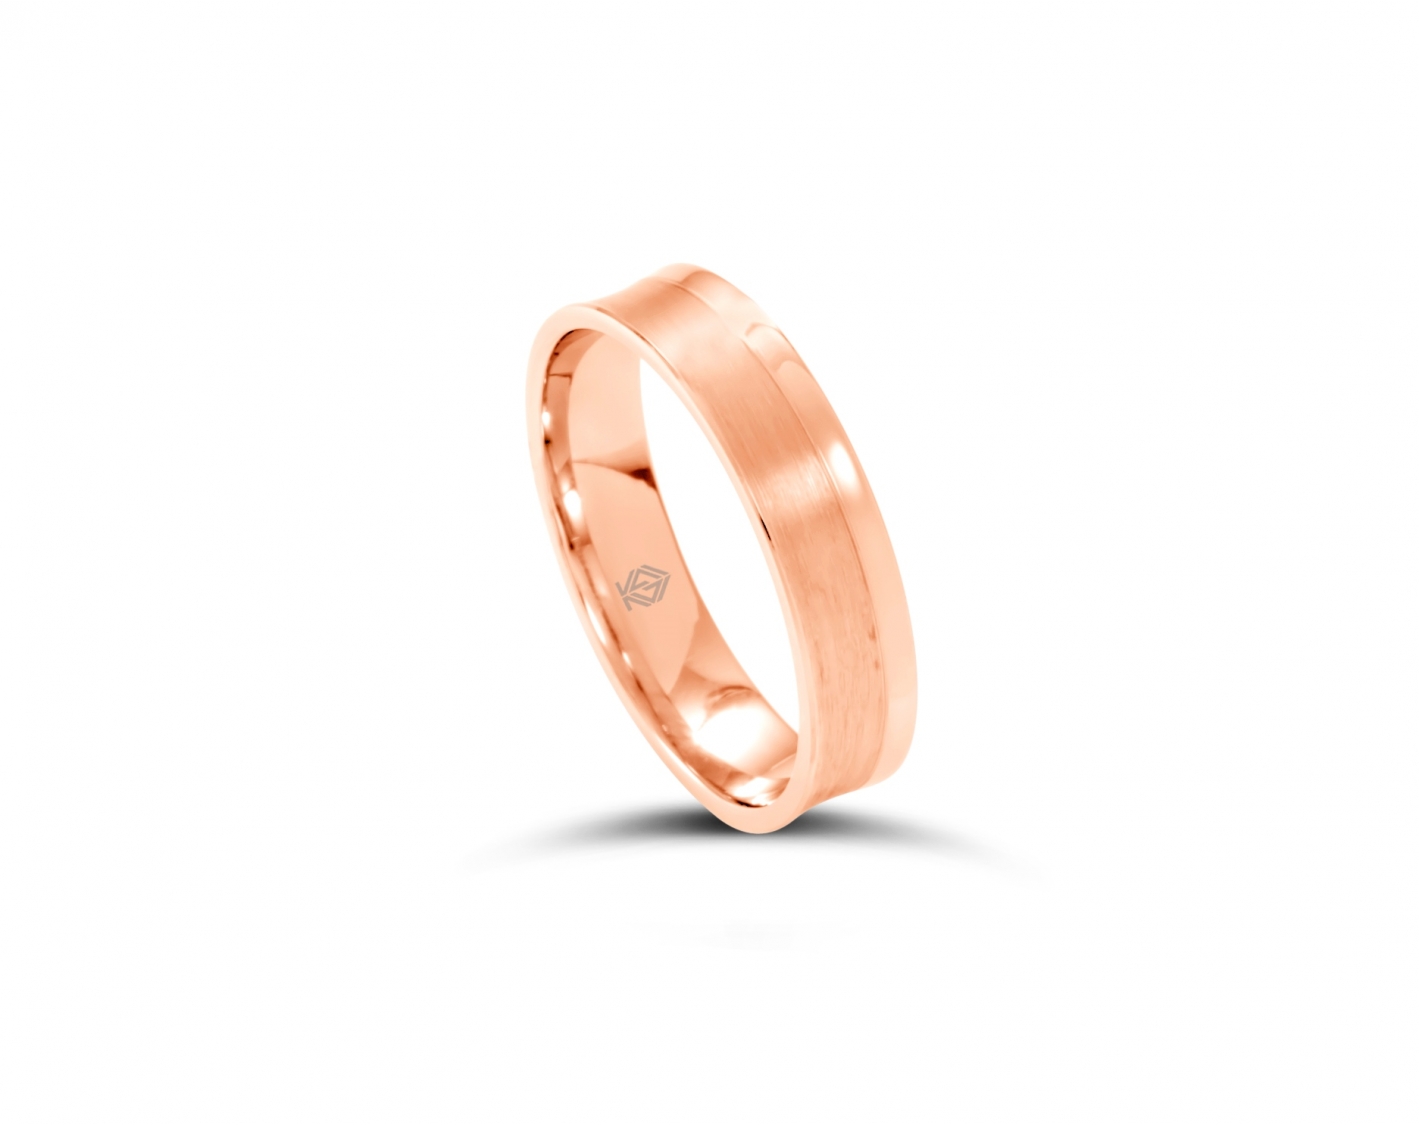 18k rose gold 5,5mm two-toned* wedding band with colored edges Photos & images